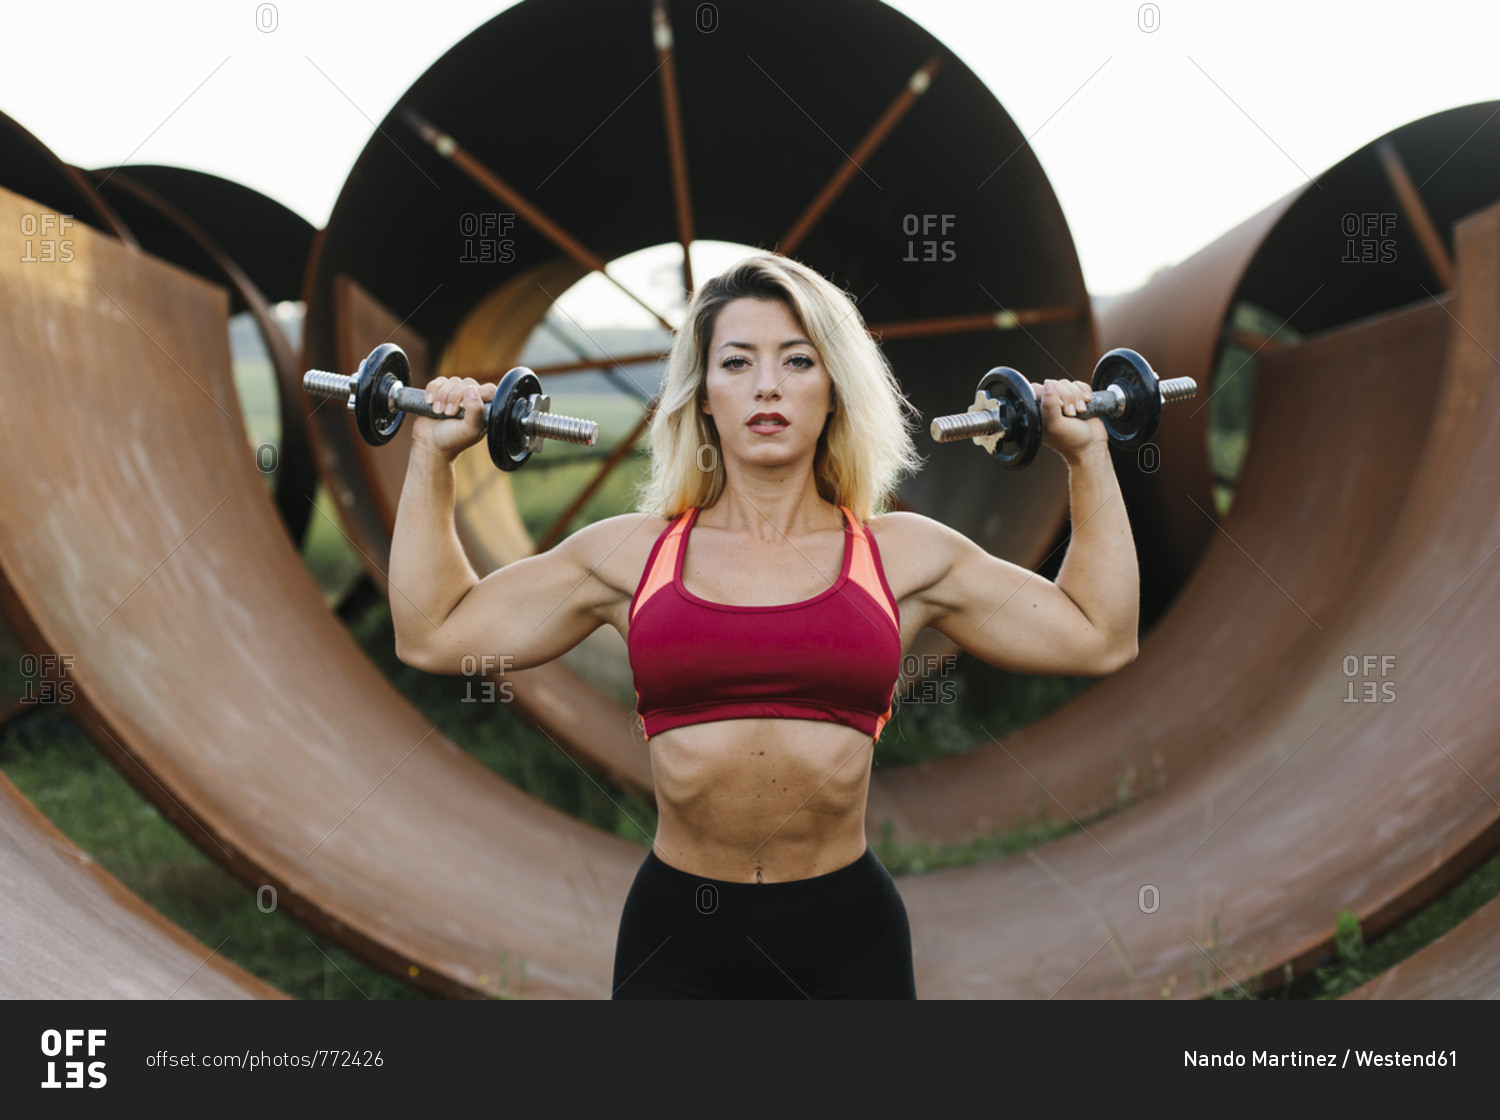 Athletic woman doing weight workout at industrial site